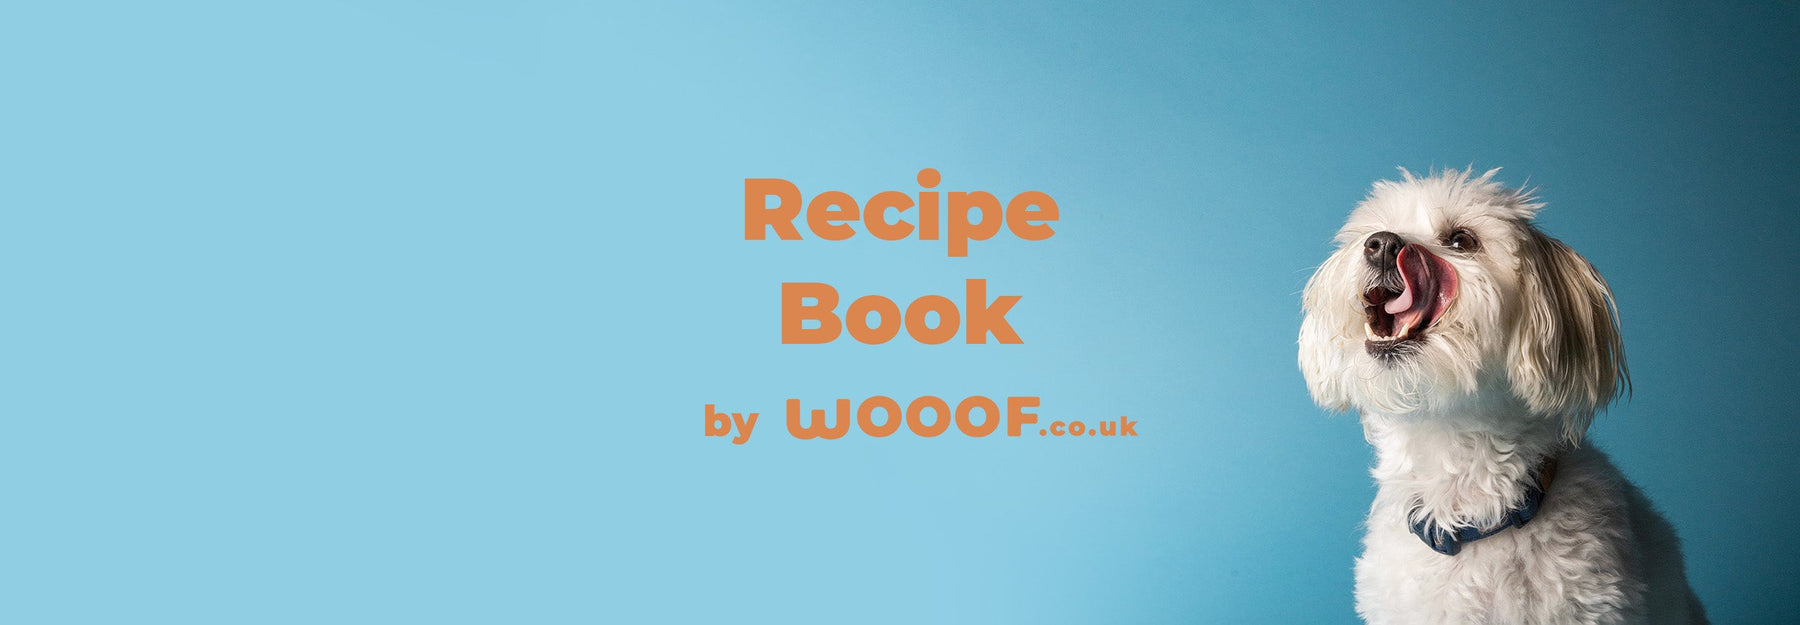 Recipe Book Banner with a dog excitingly licking it's mouth